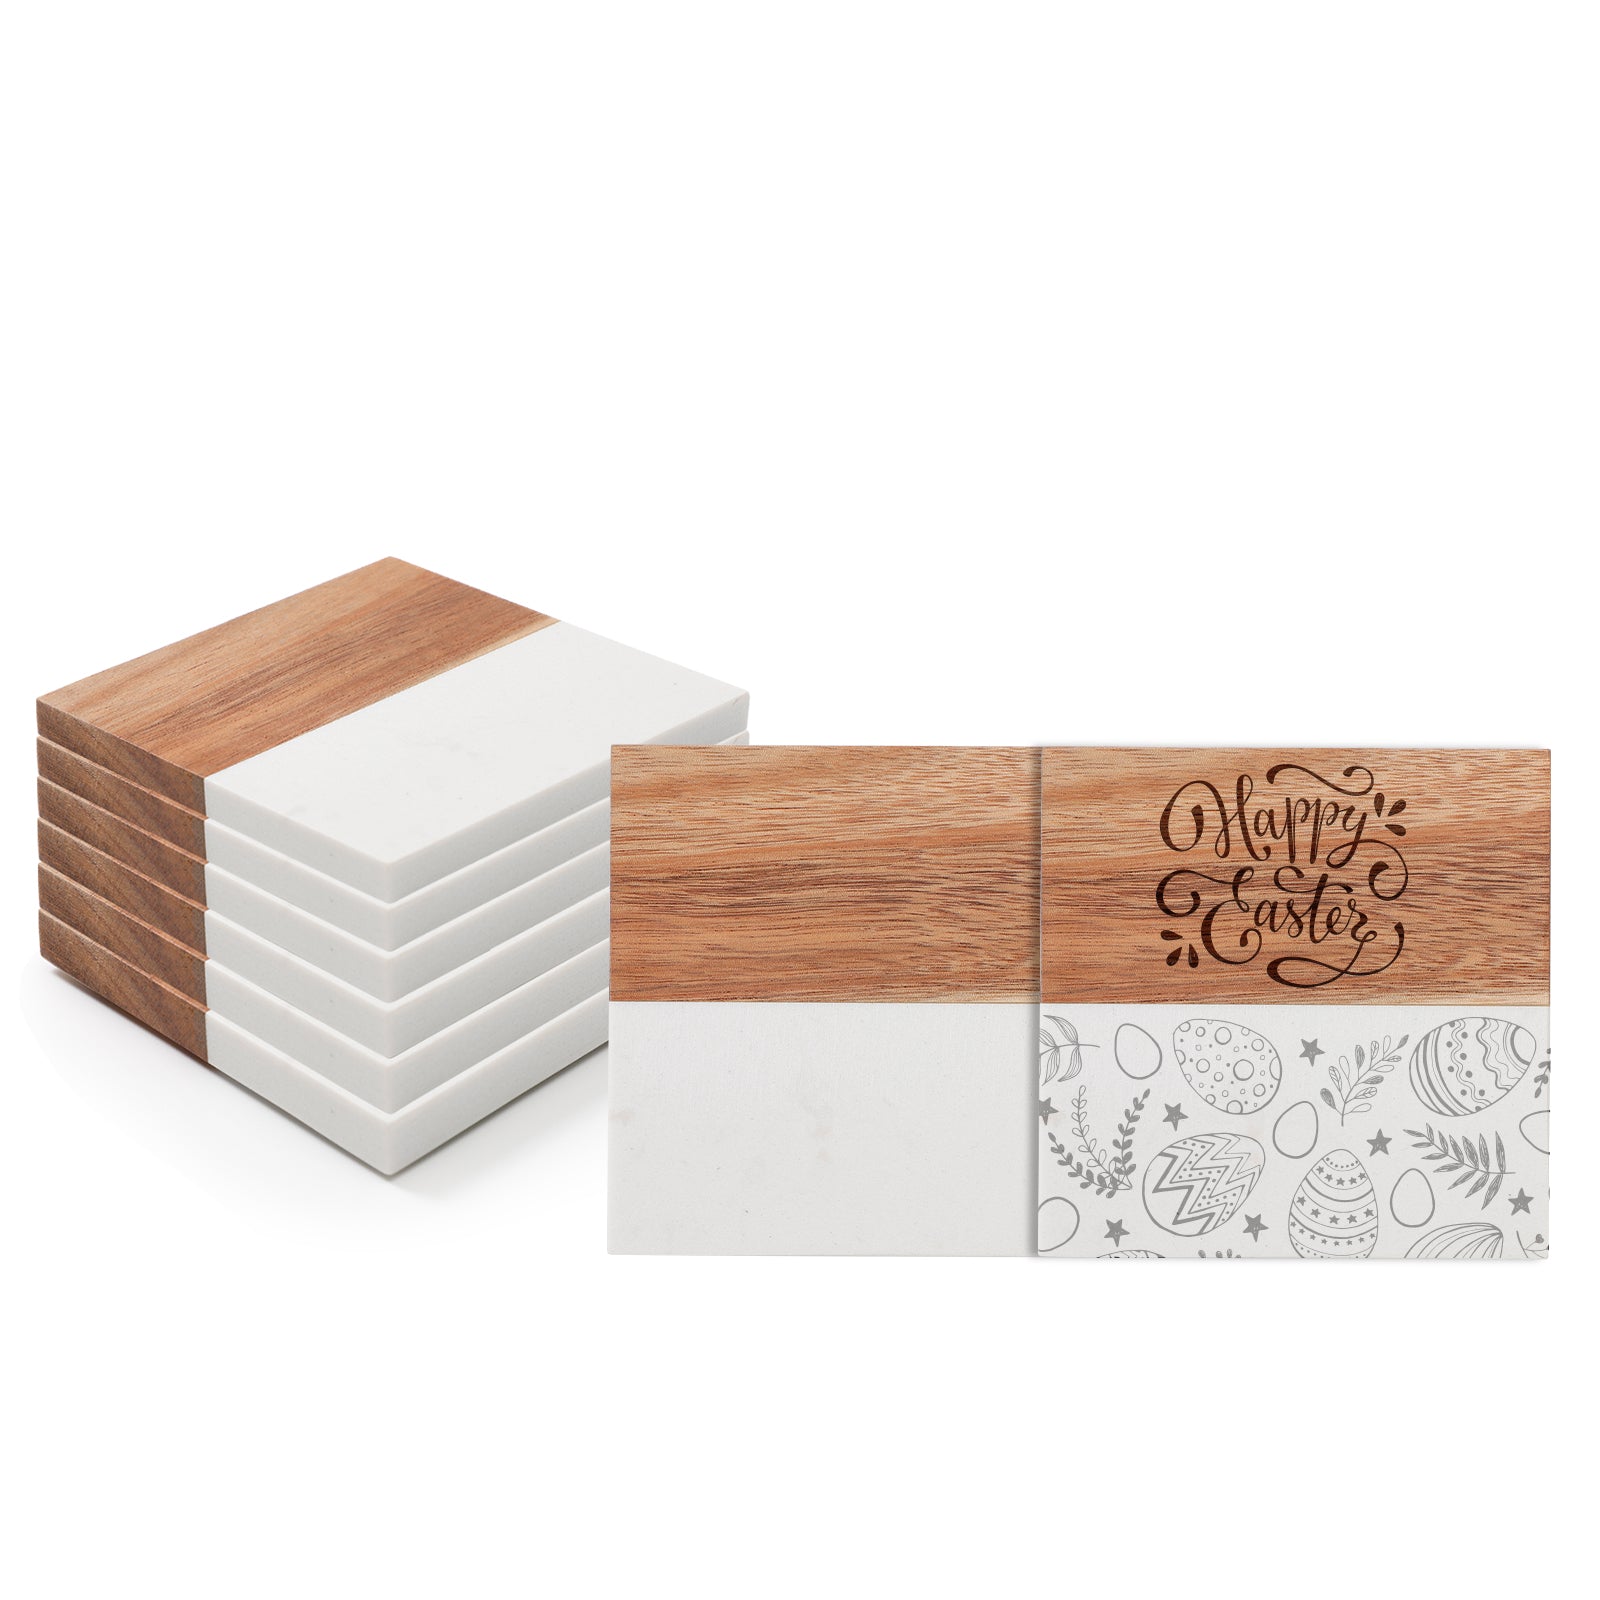  Handmade Blank Marble Coasters - Square Wooden